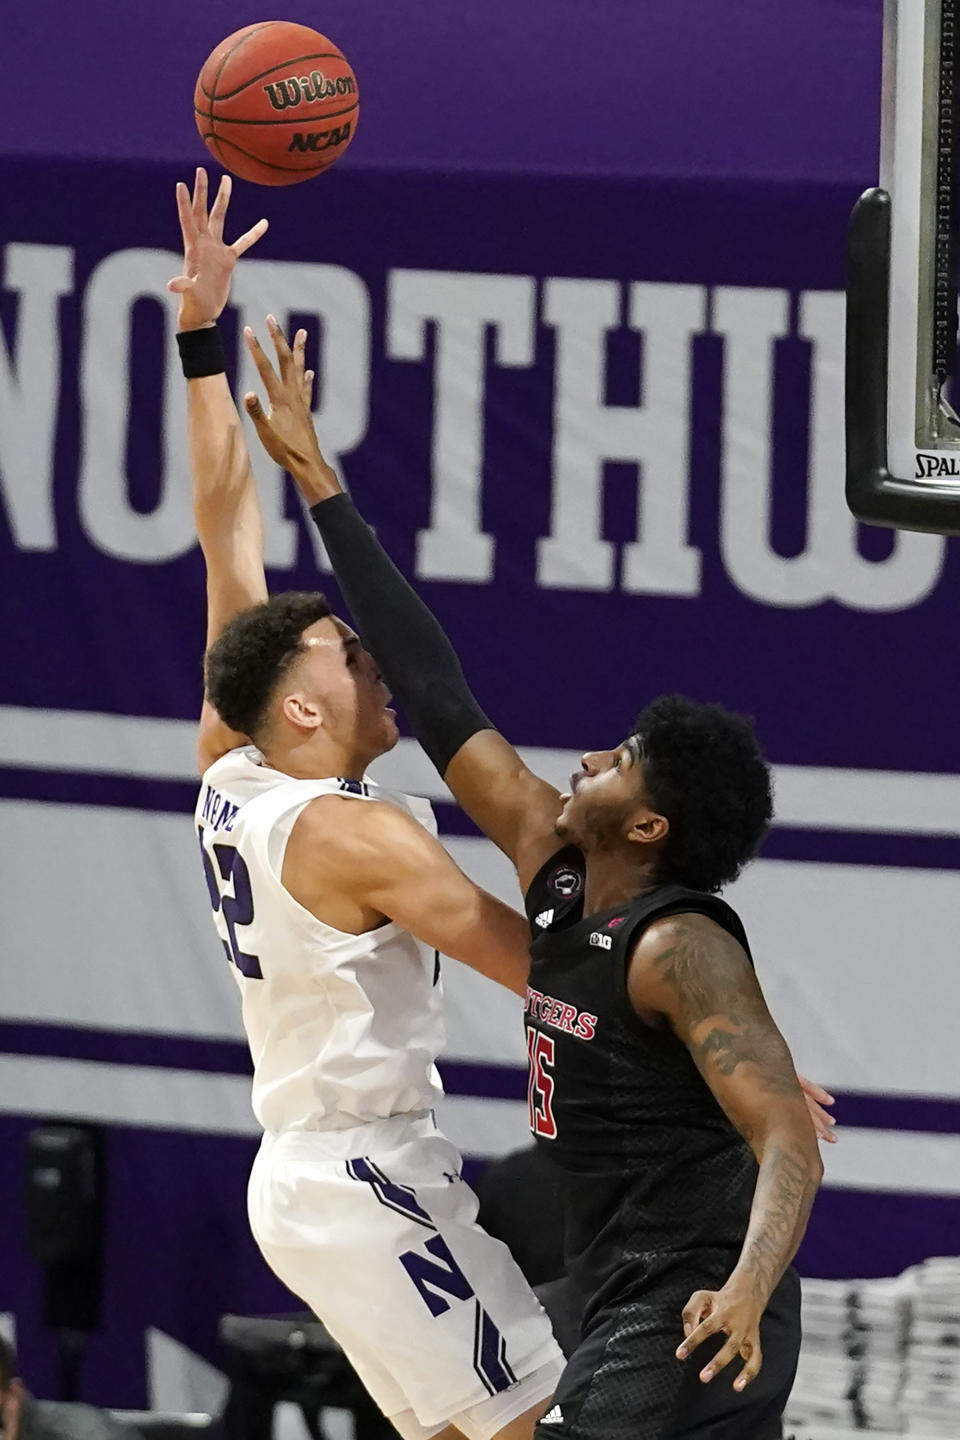 Northwestern forward Pete Nance, left, shoots over Rutgers center Myles Johnson, right, during the first half of an NCAA college basketball game in Evanston, Ill., Sunday, Jan. 31, 2021. (AP Photo/Nam Y. Huh)